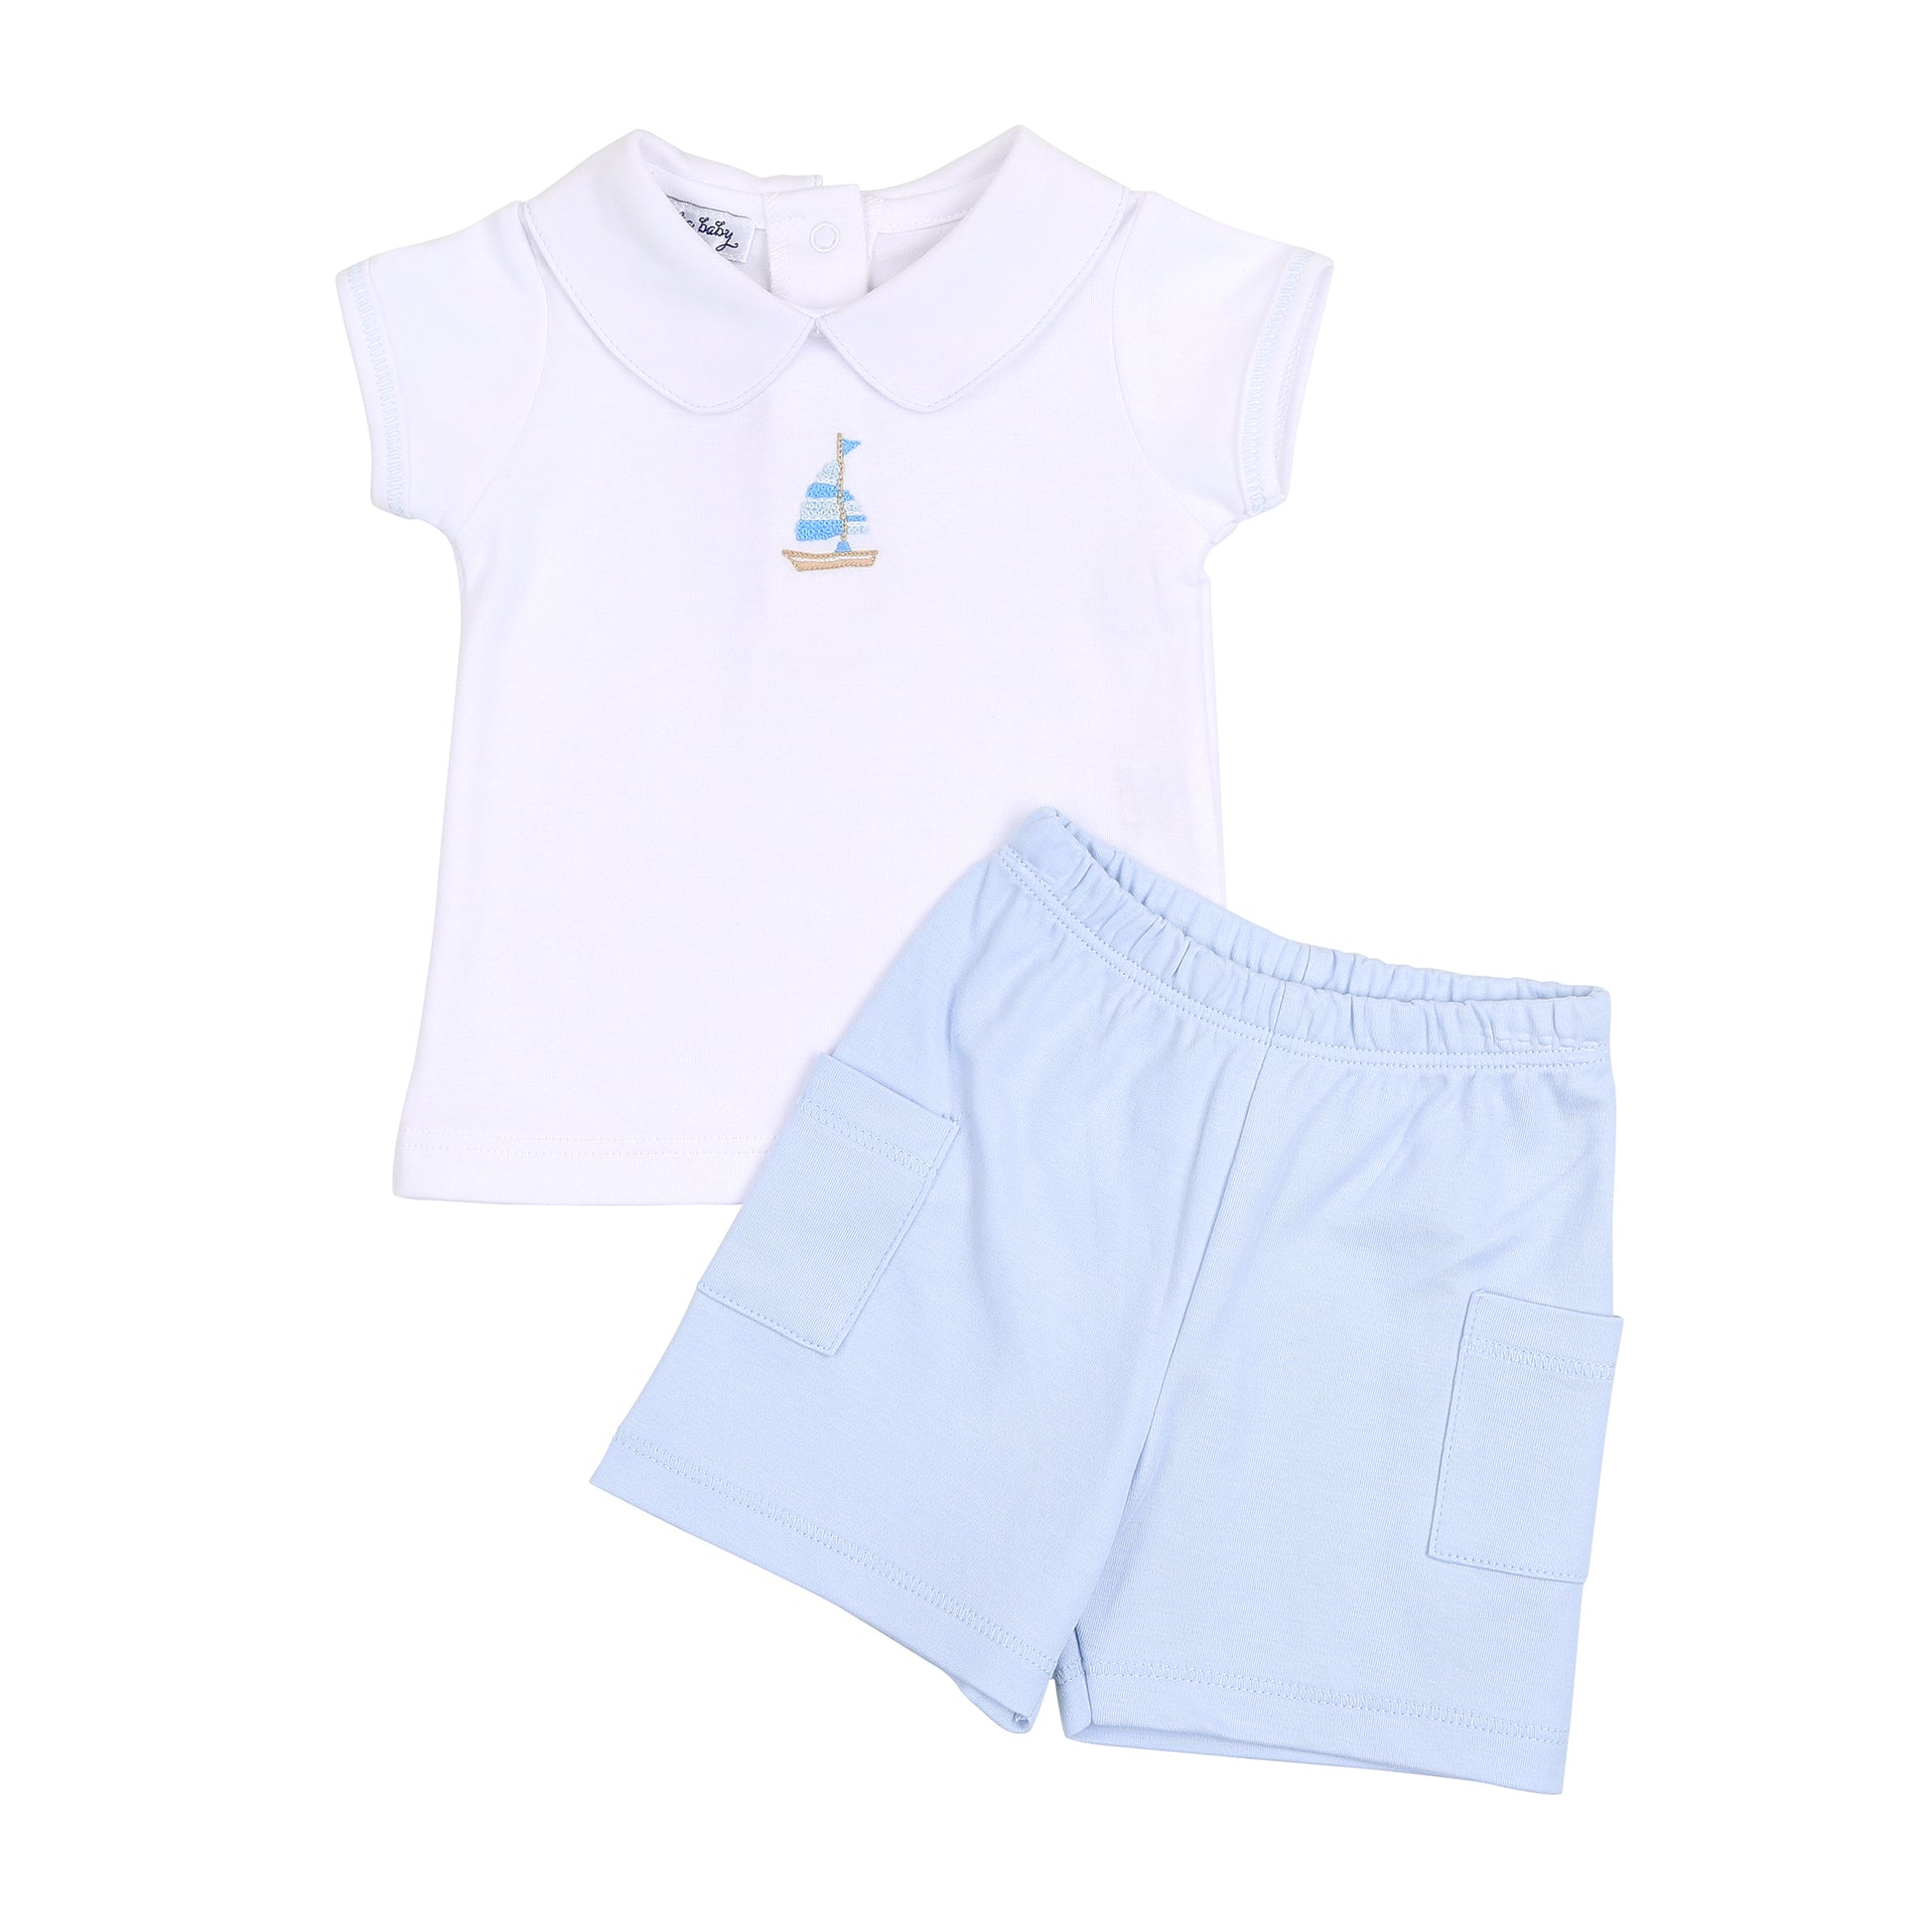 Tiny Sailboat Embroidered Collared Short Set made by Magnolia Baby.